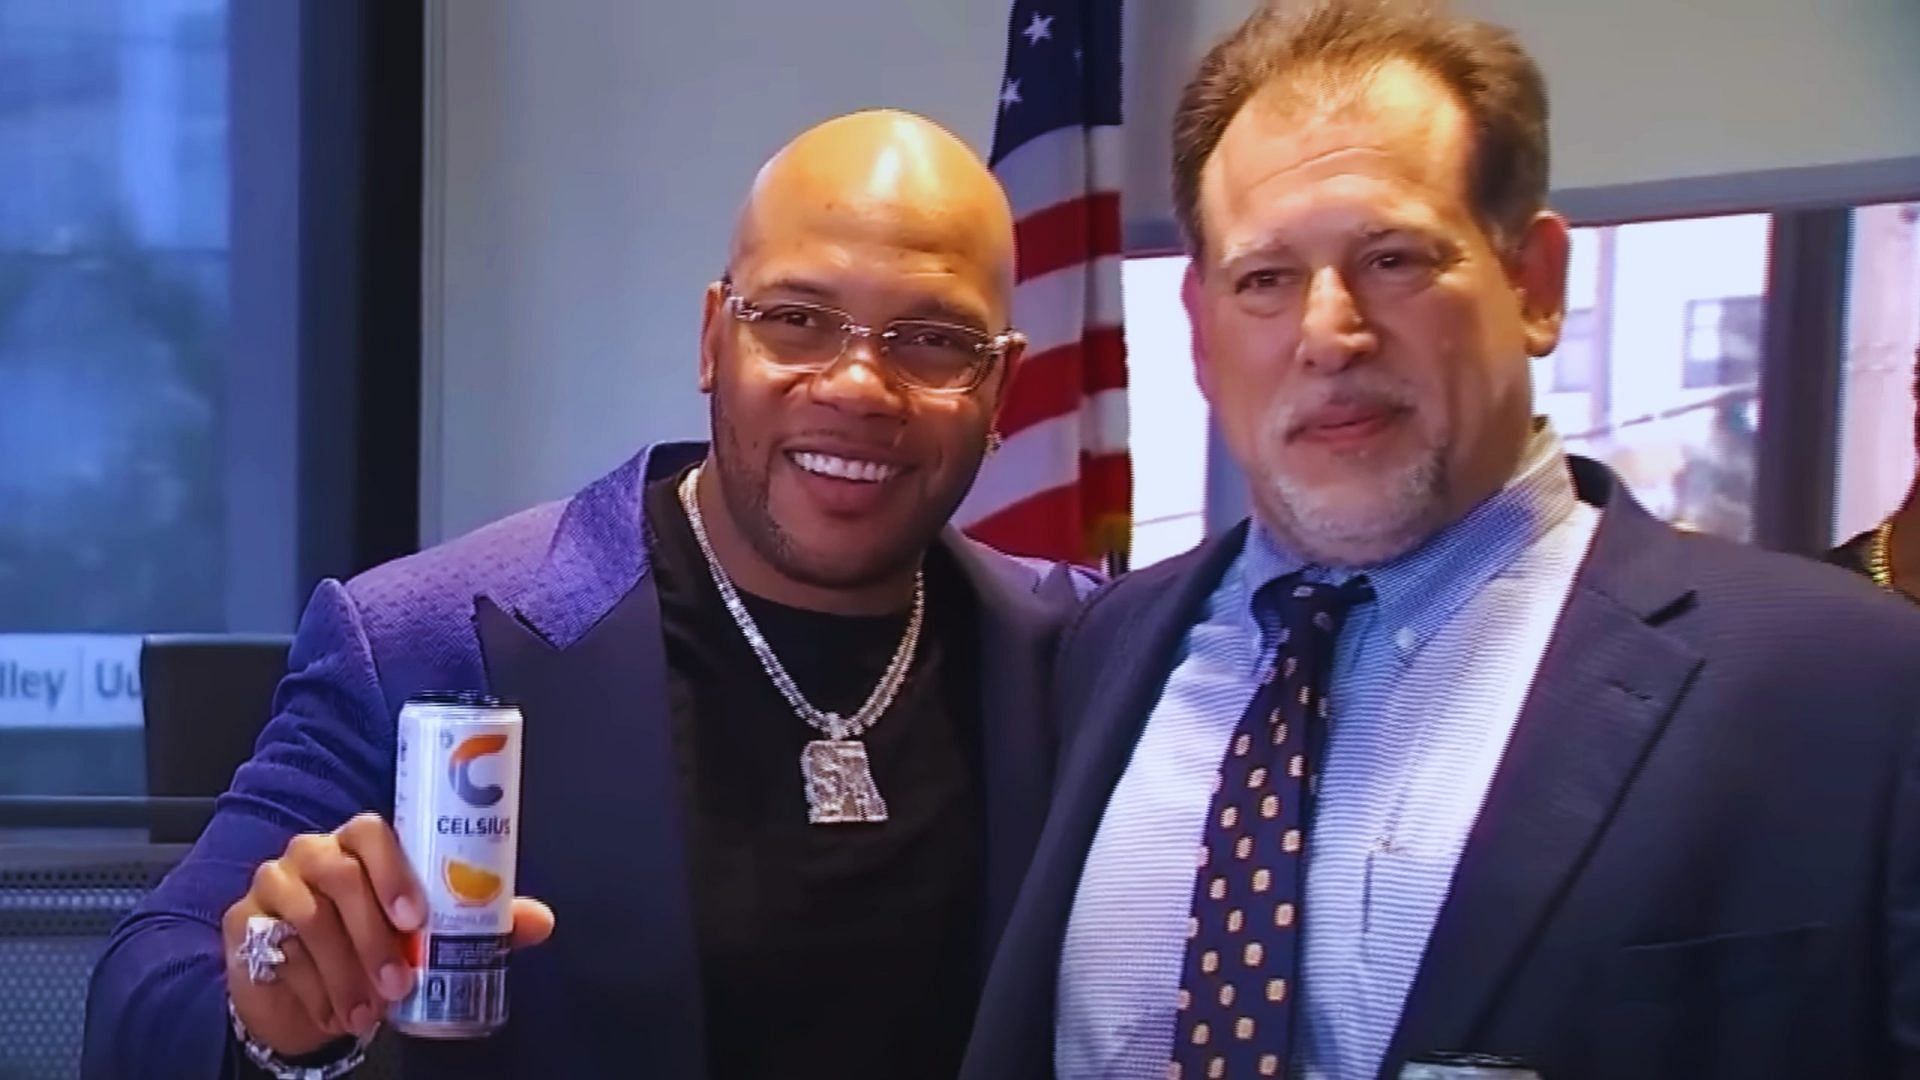 Flo Rida posing with a Celsius energy drink can after winning the lawsuit
        